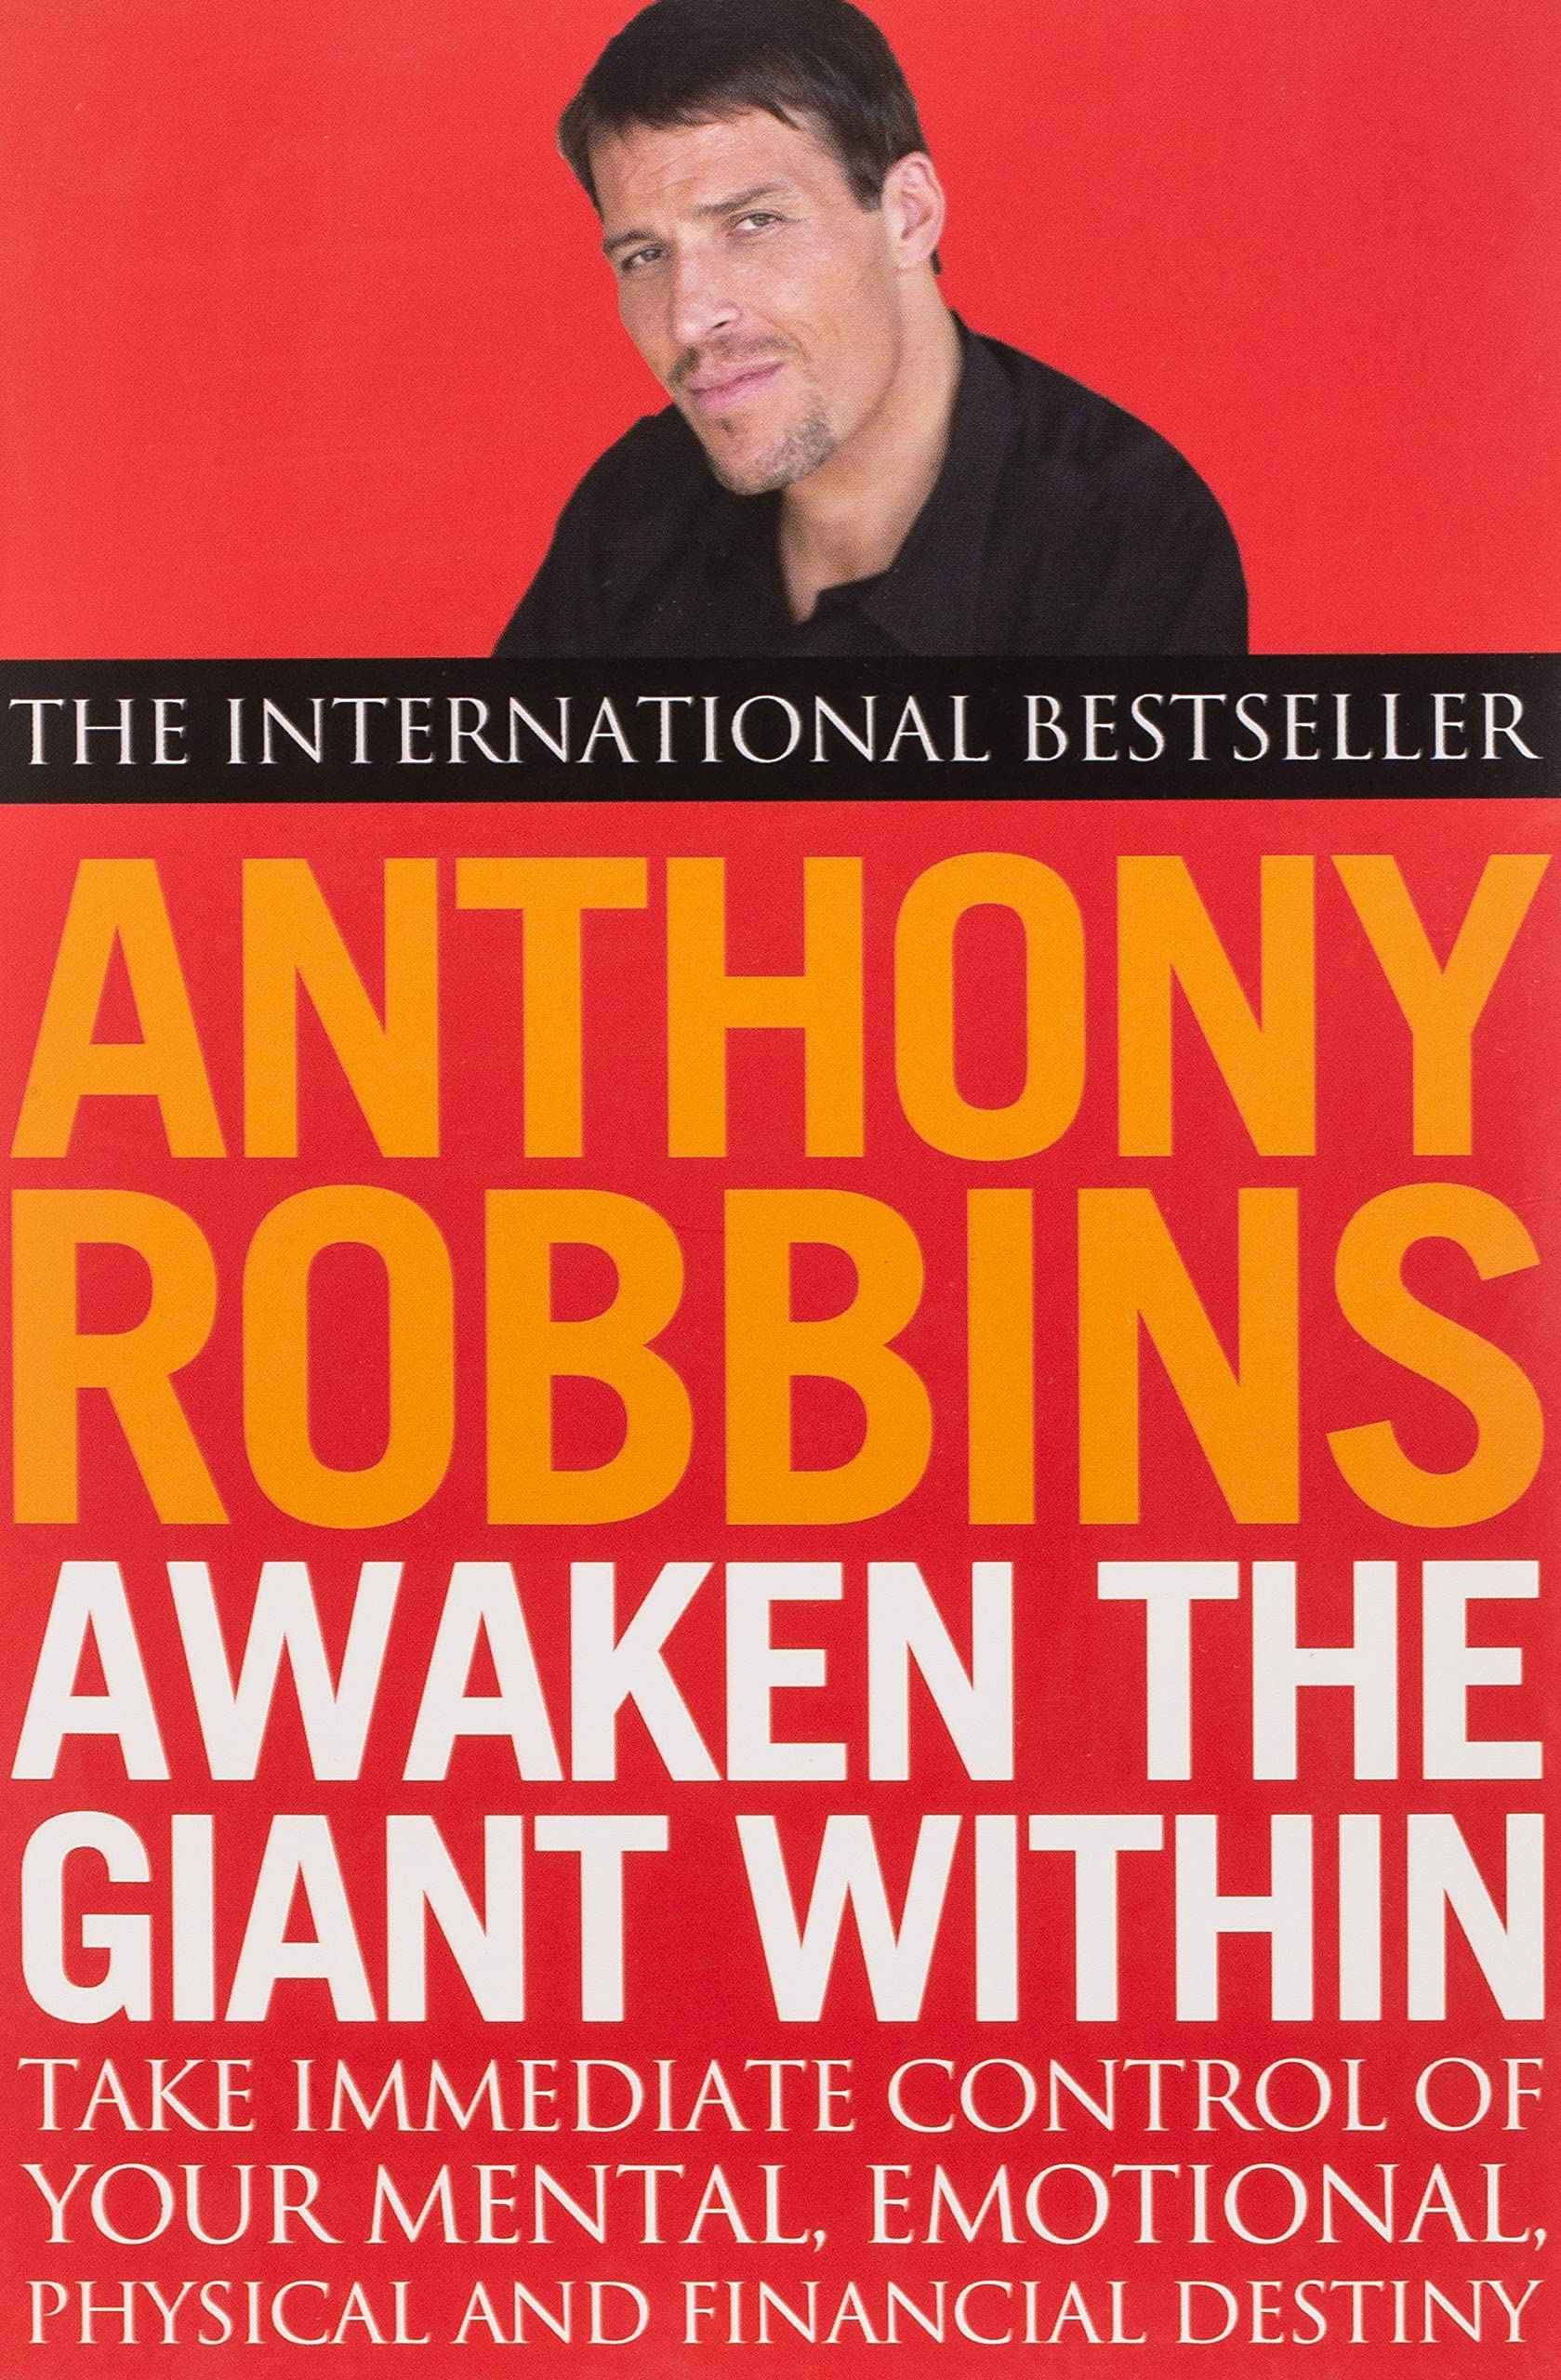 Awaken the giant within by Anthony Robbins